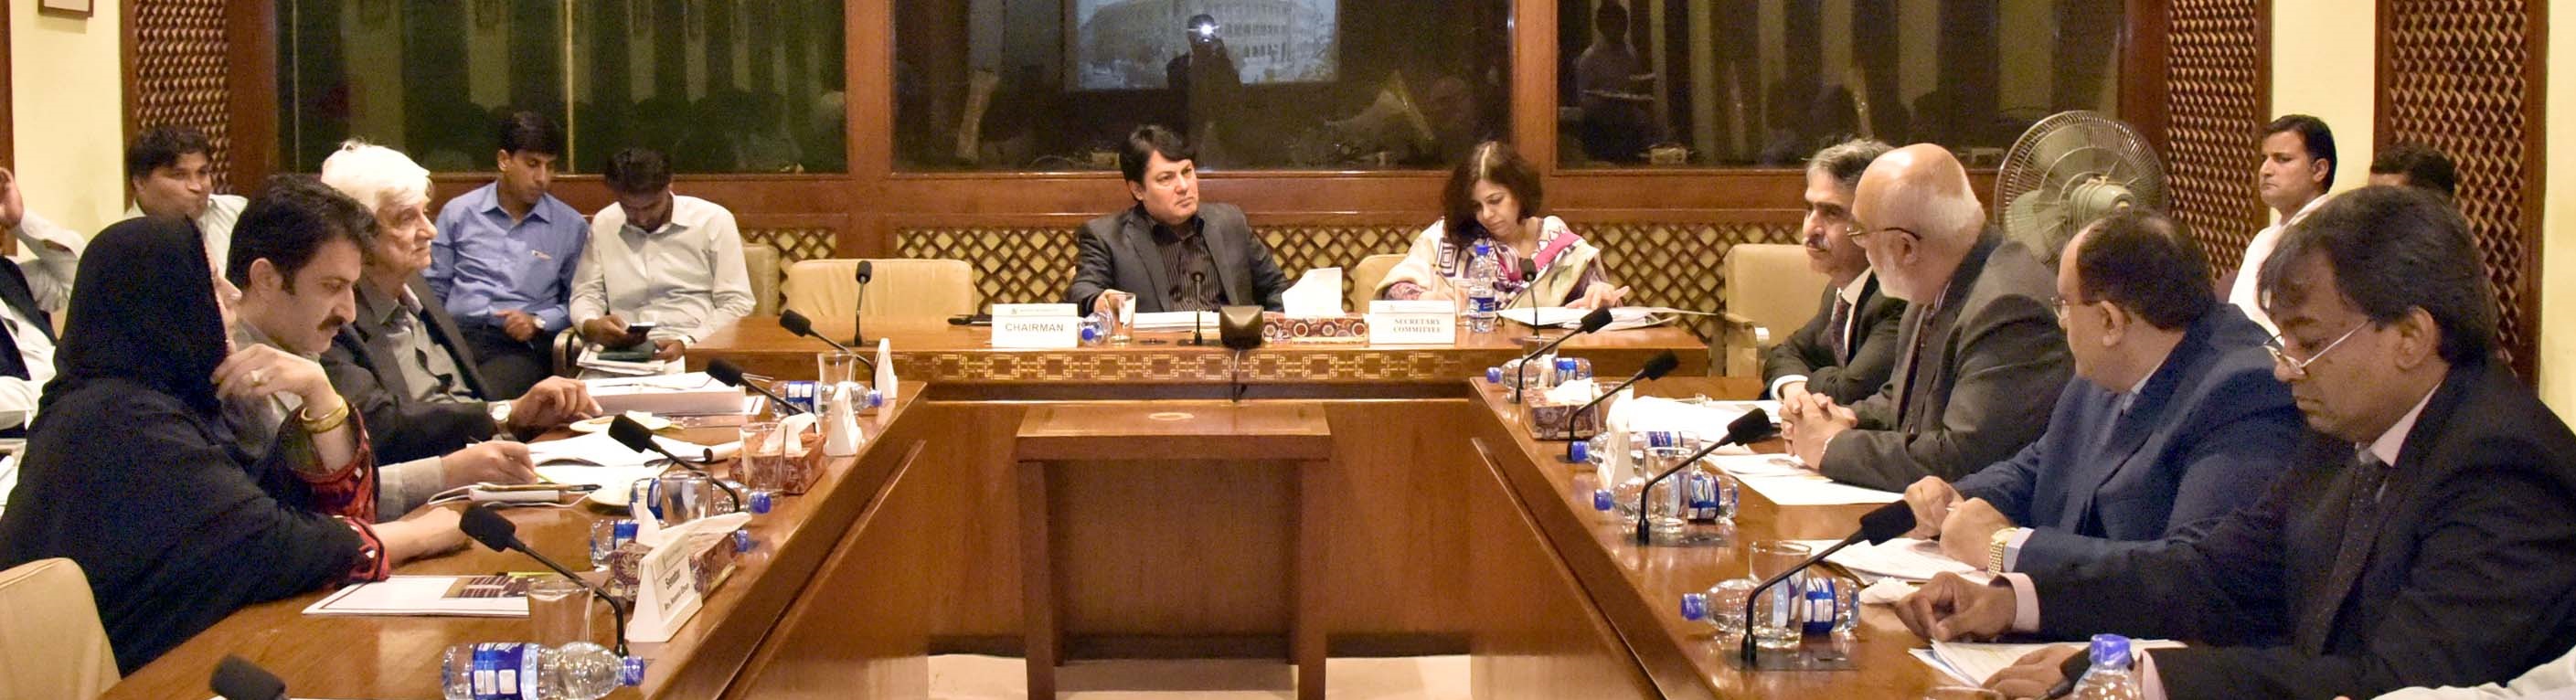 SENATOR MUHAMMAD ALI KHAN SAIF, CHAIRMAN SENATE STANDING COMMITTEE ON PORTS AND SHIPPING PRESIDING OVER A MEETING OF THE COMMITTEE AT PARLIAMENT HOUSE ISLAMABAD